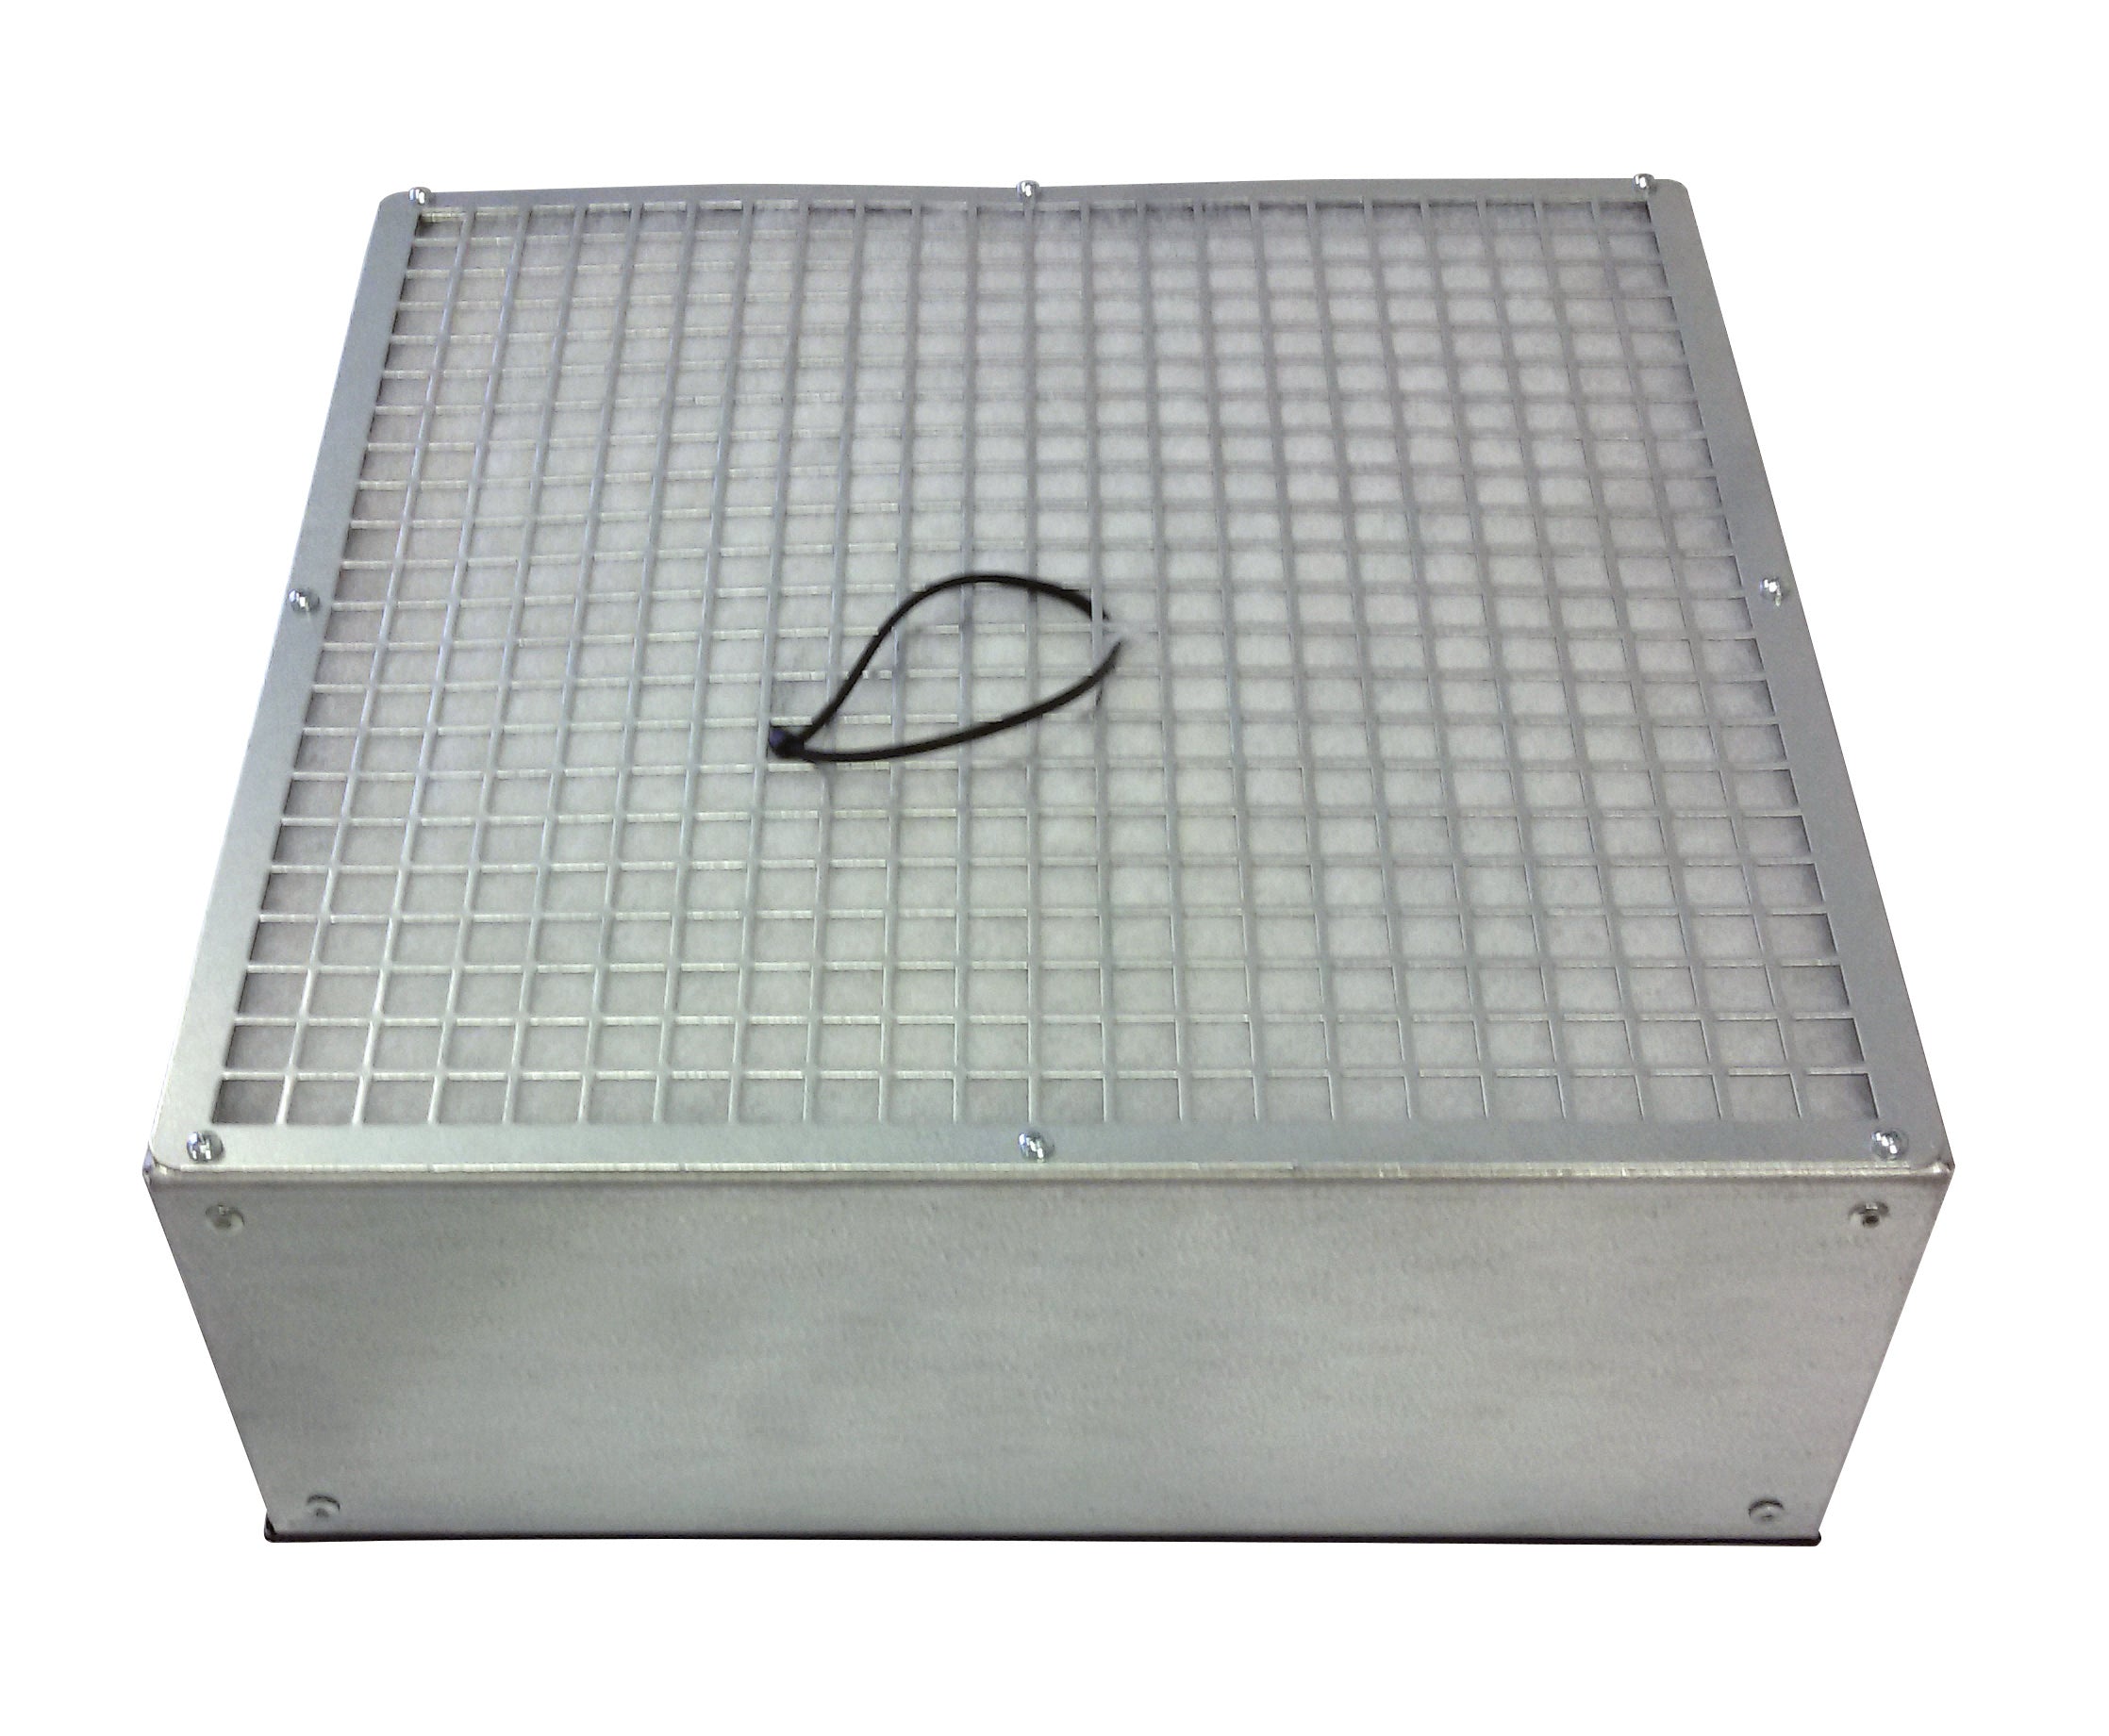 New activated carbon filter (square) for model(s): (all models)